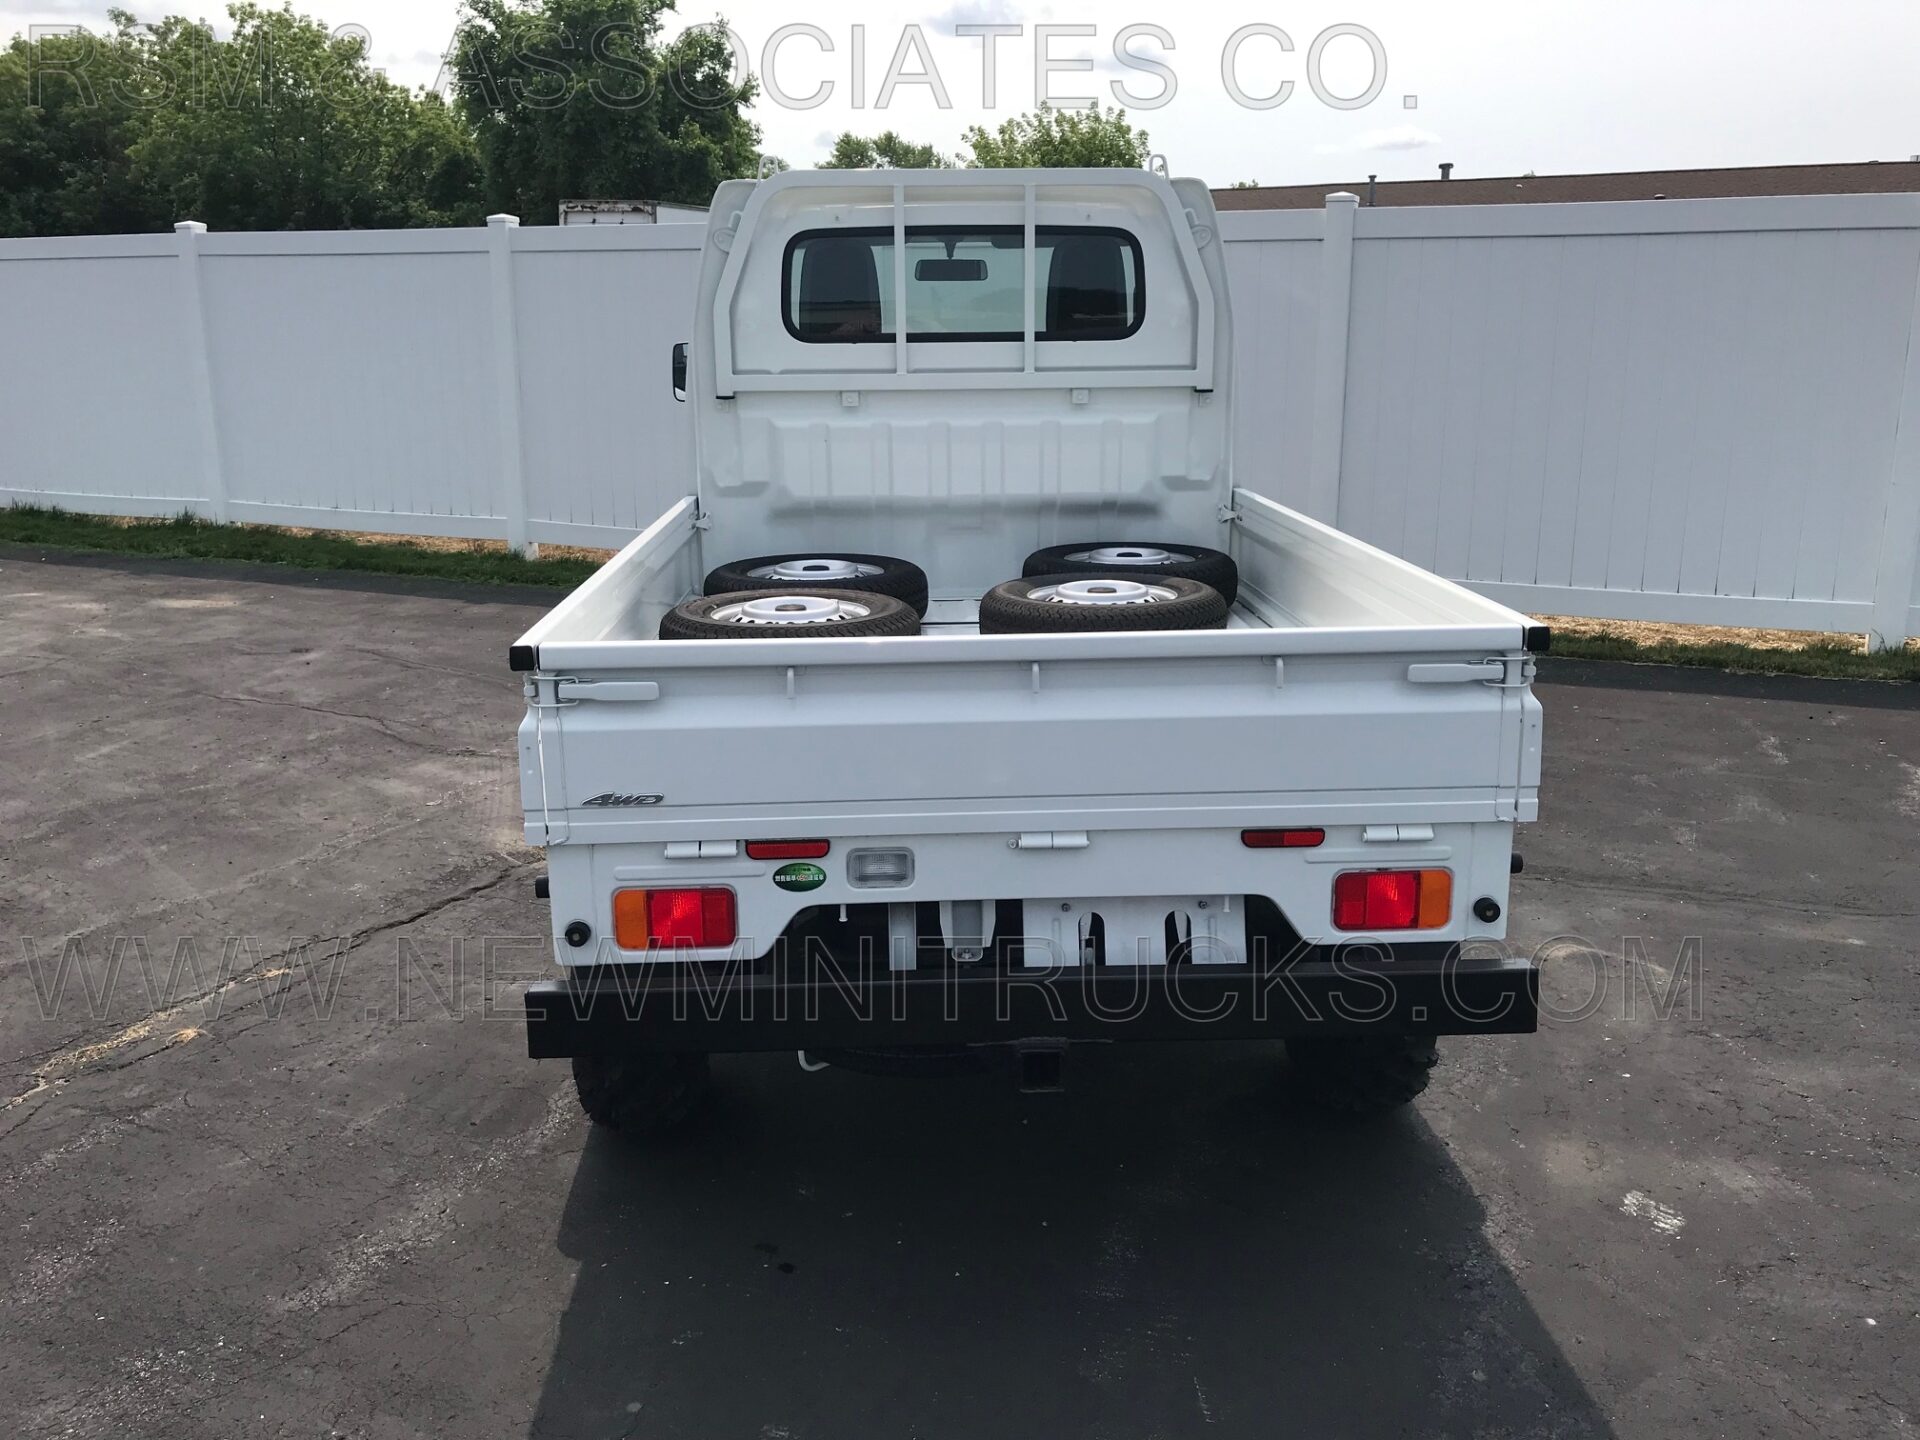 white mini truck with four extra tires